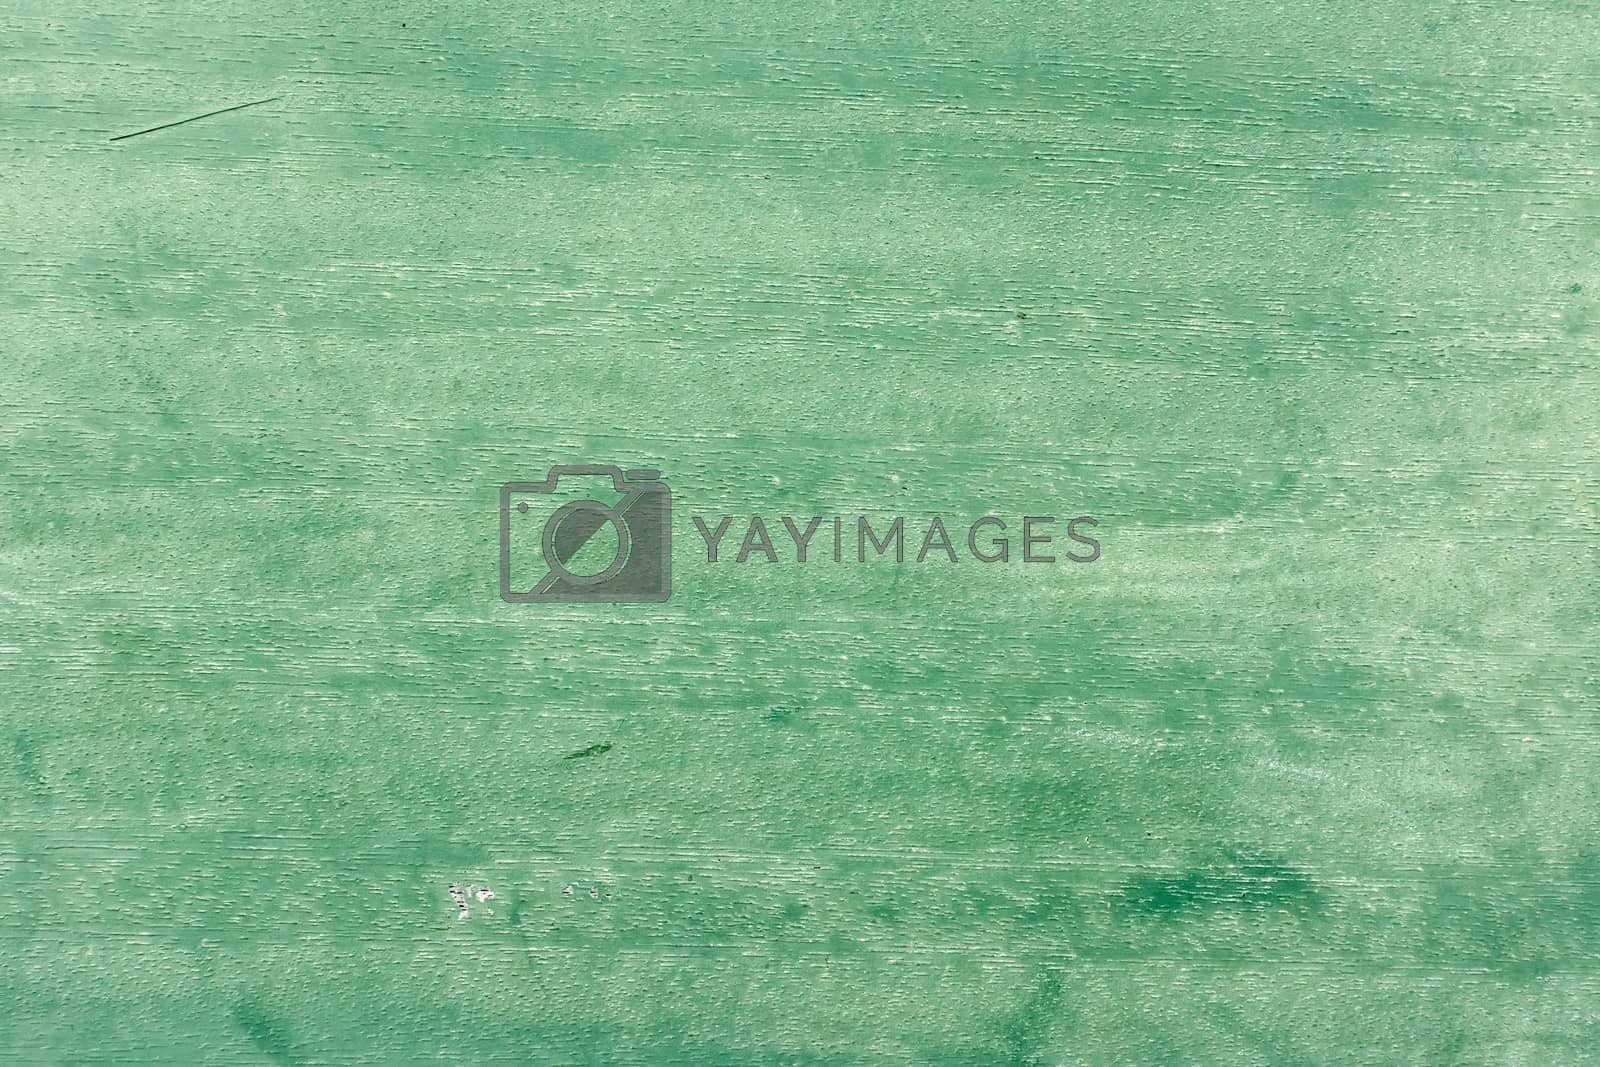 Royalty free image of Green textured background by elwynn